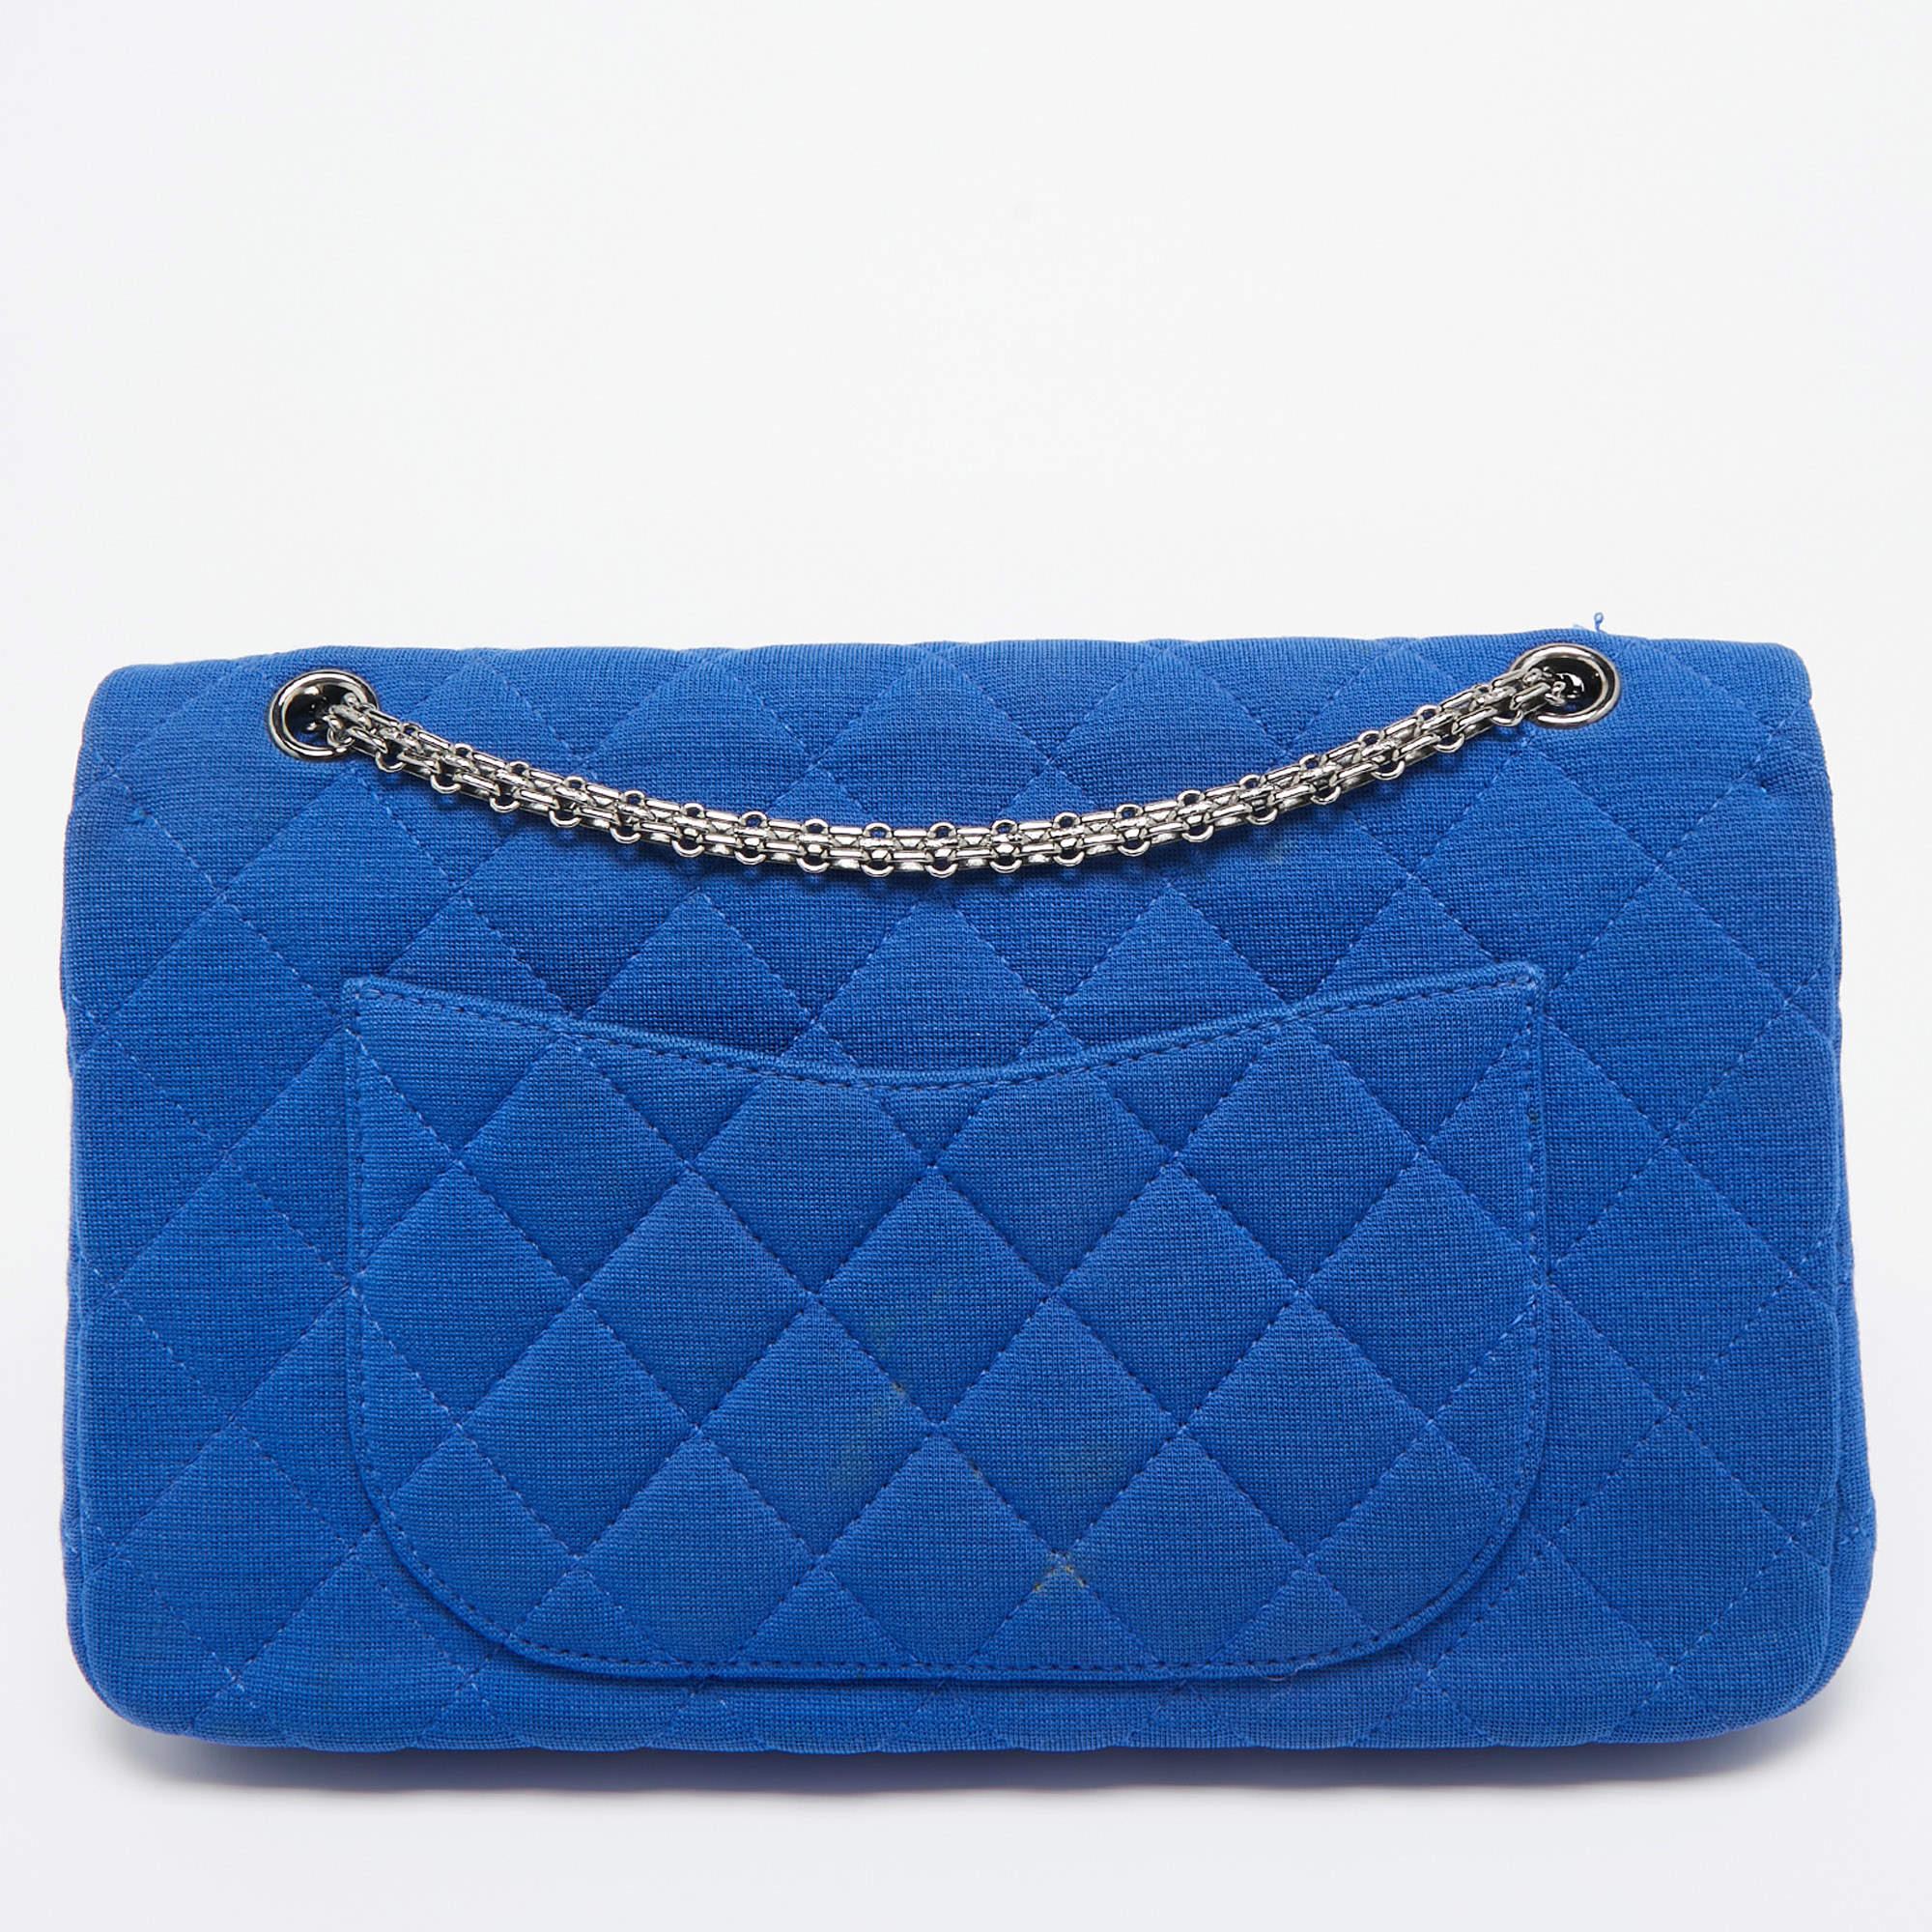 Chanel Blue Jersey Classic 227 Reissue 2.55 Flap Bag For Sale 9